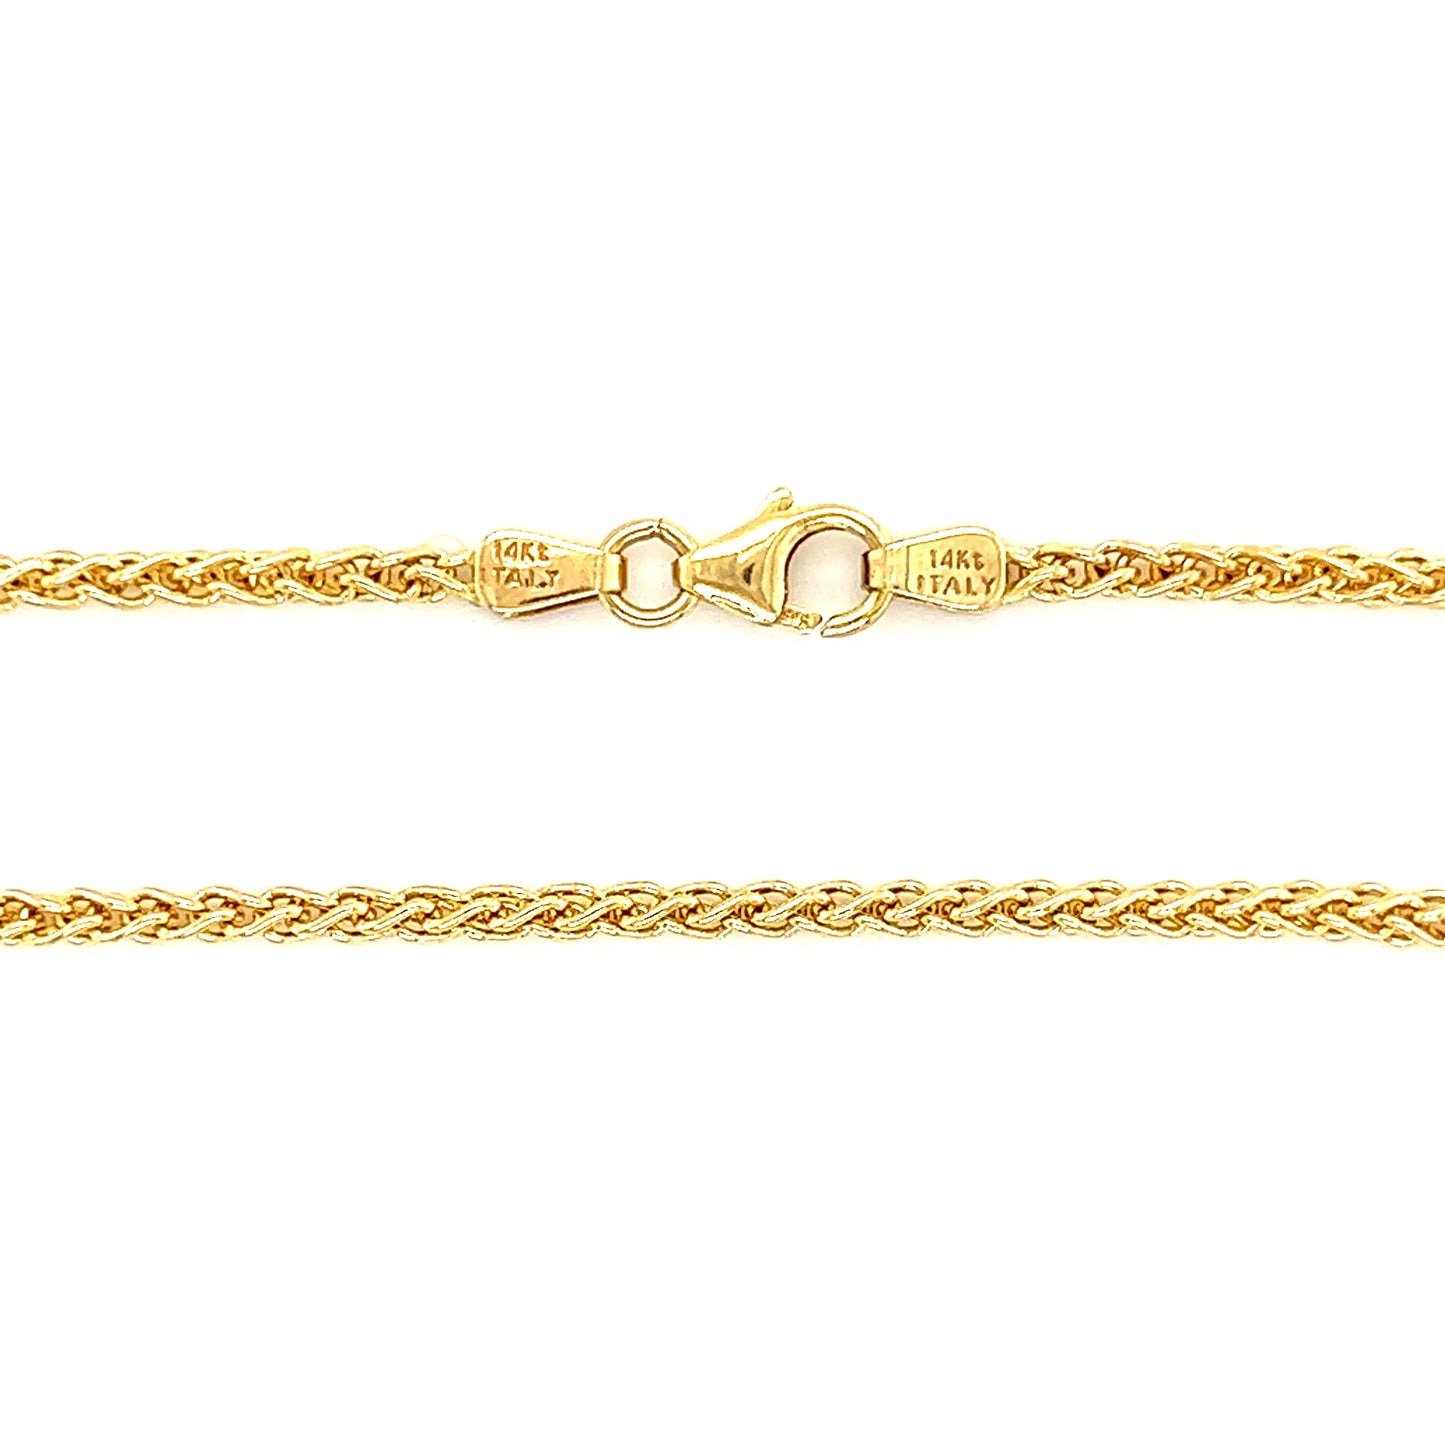 Wheat 2.1mm Chain with 18in Length in 14K Yellow Gold Chain and Clasp View